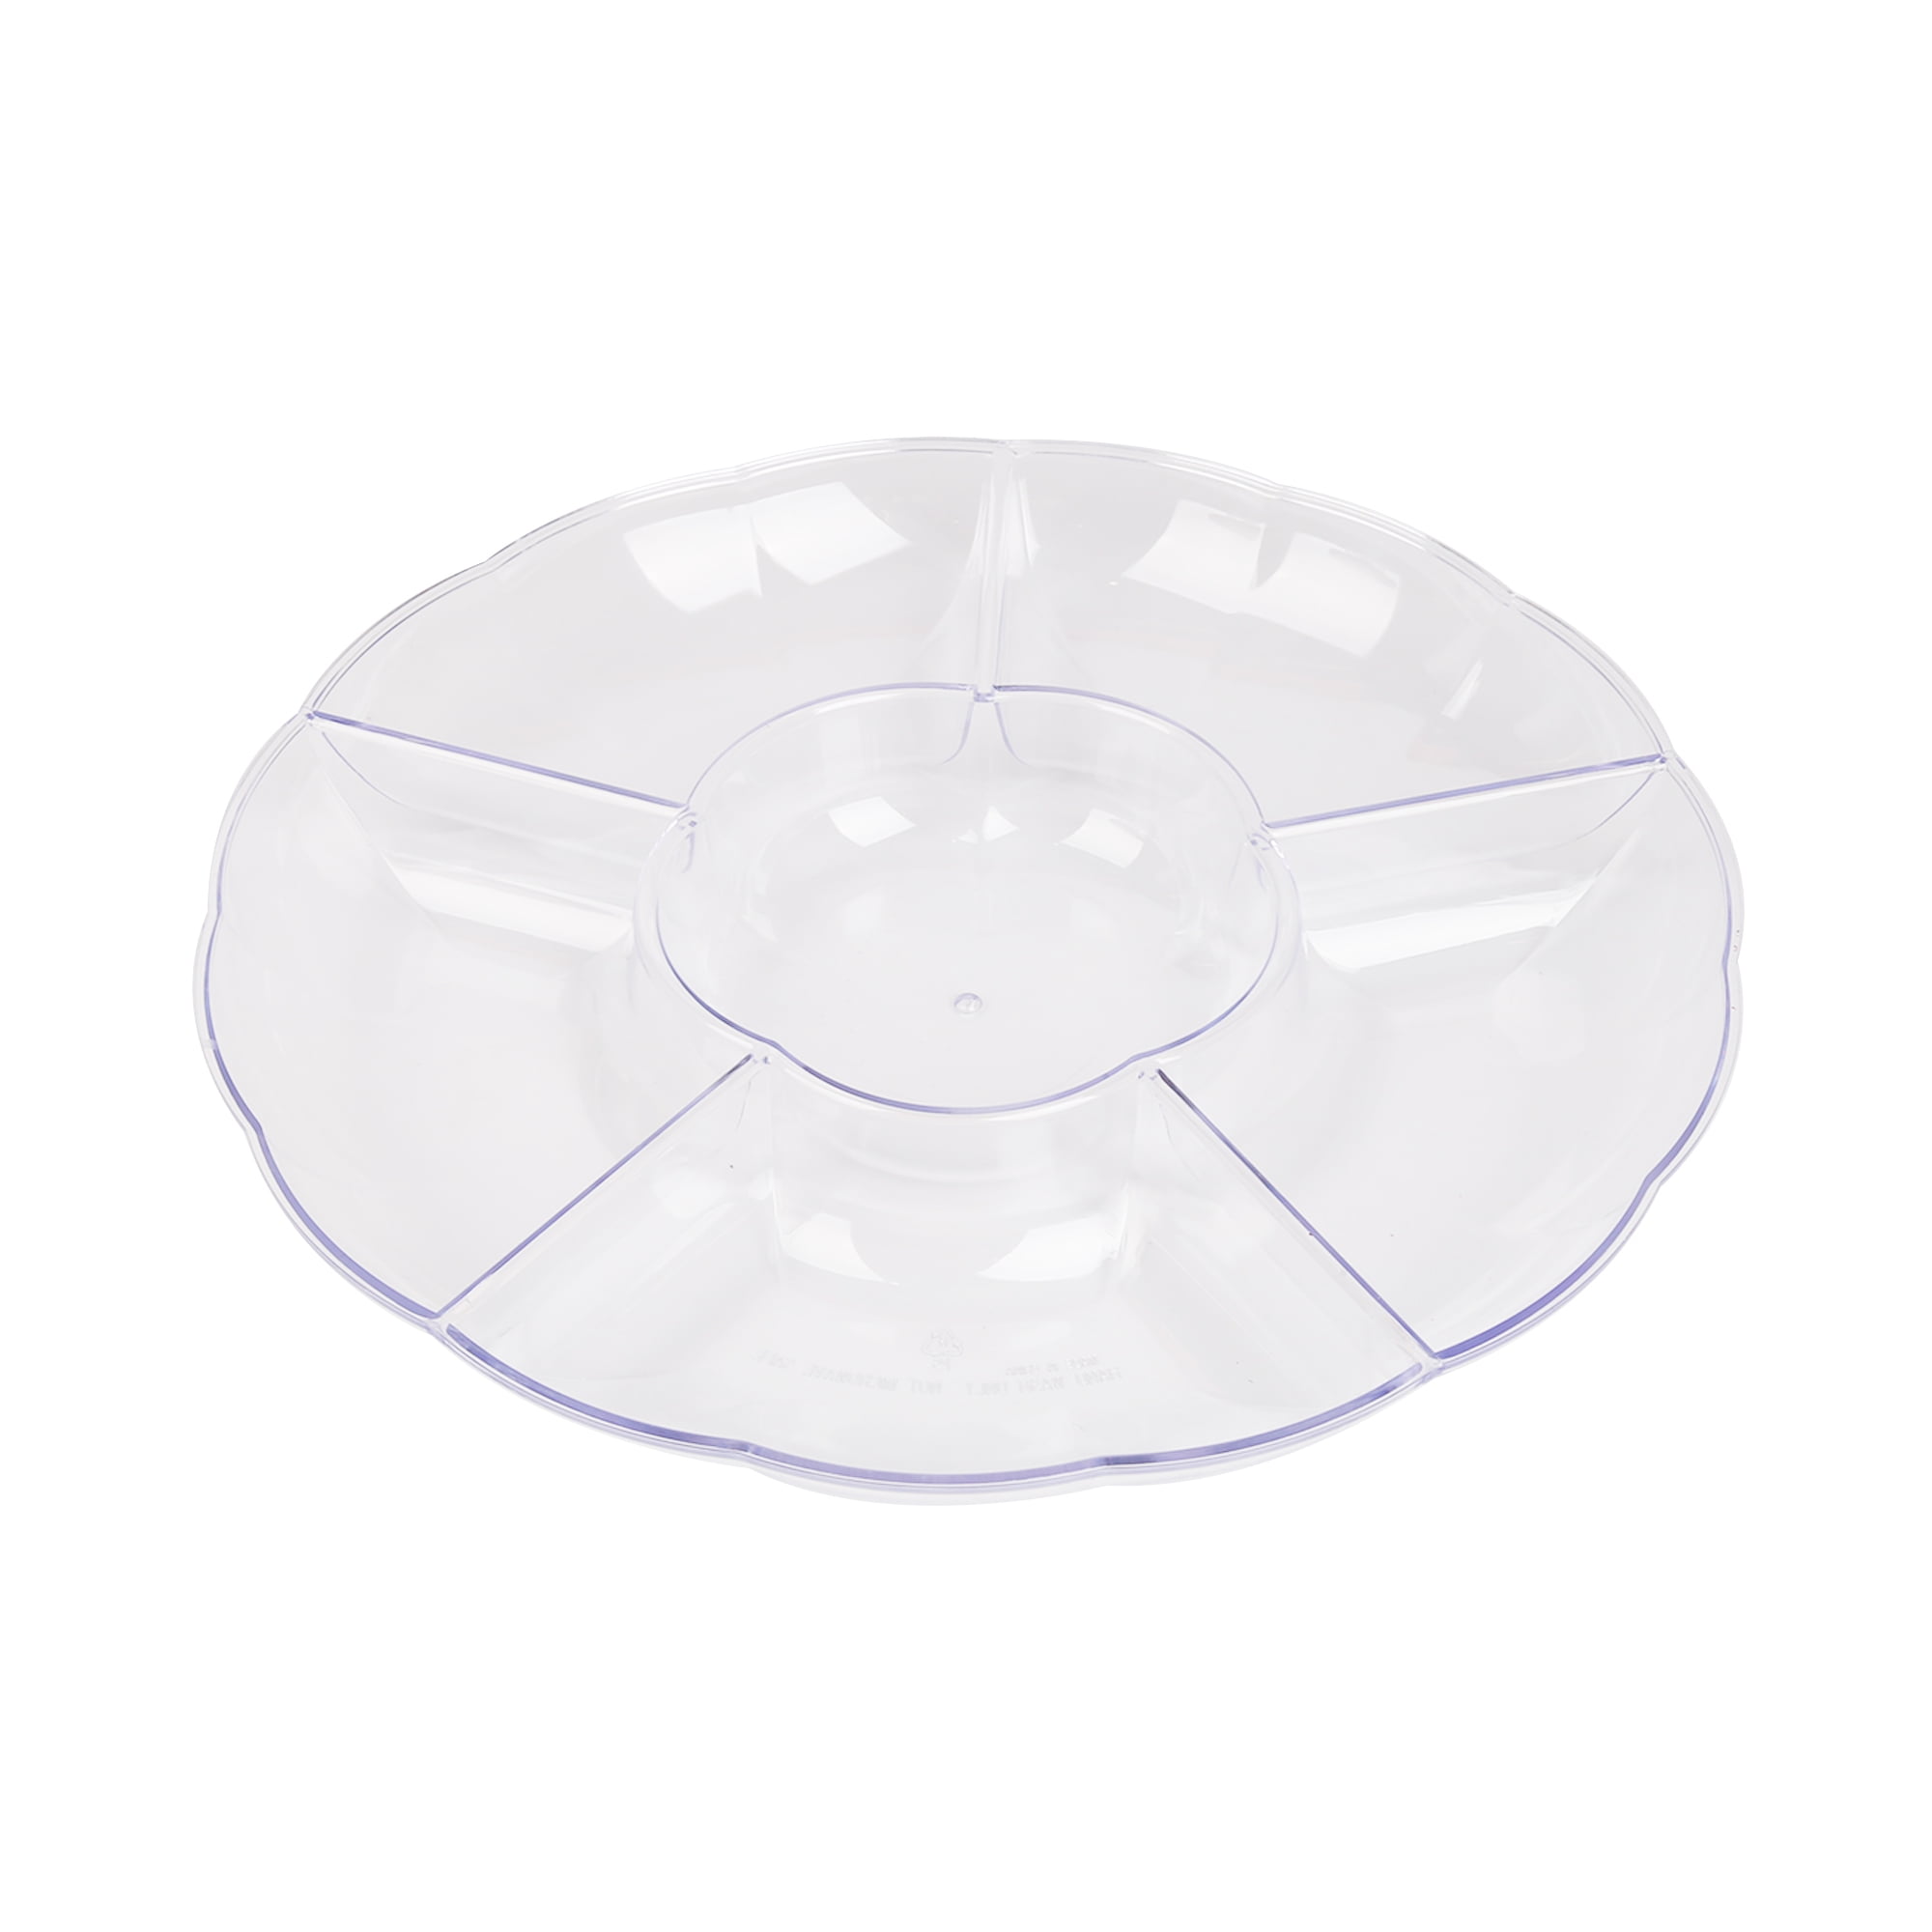 American Style Thicker Round Plastic Containers 2 Compartment Tray